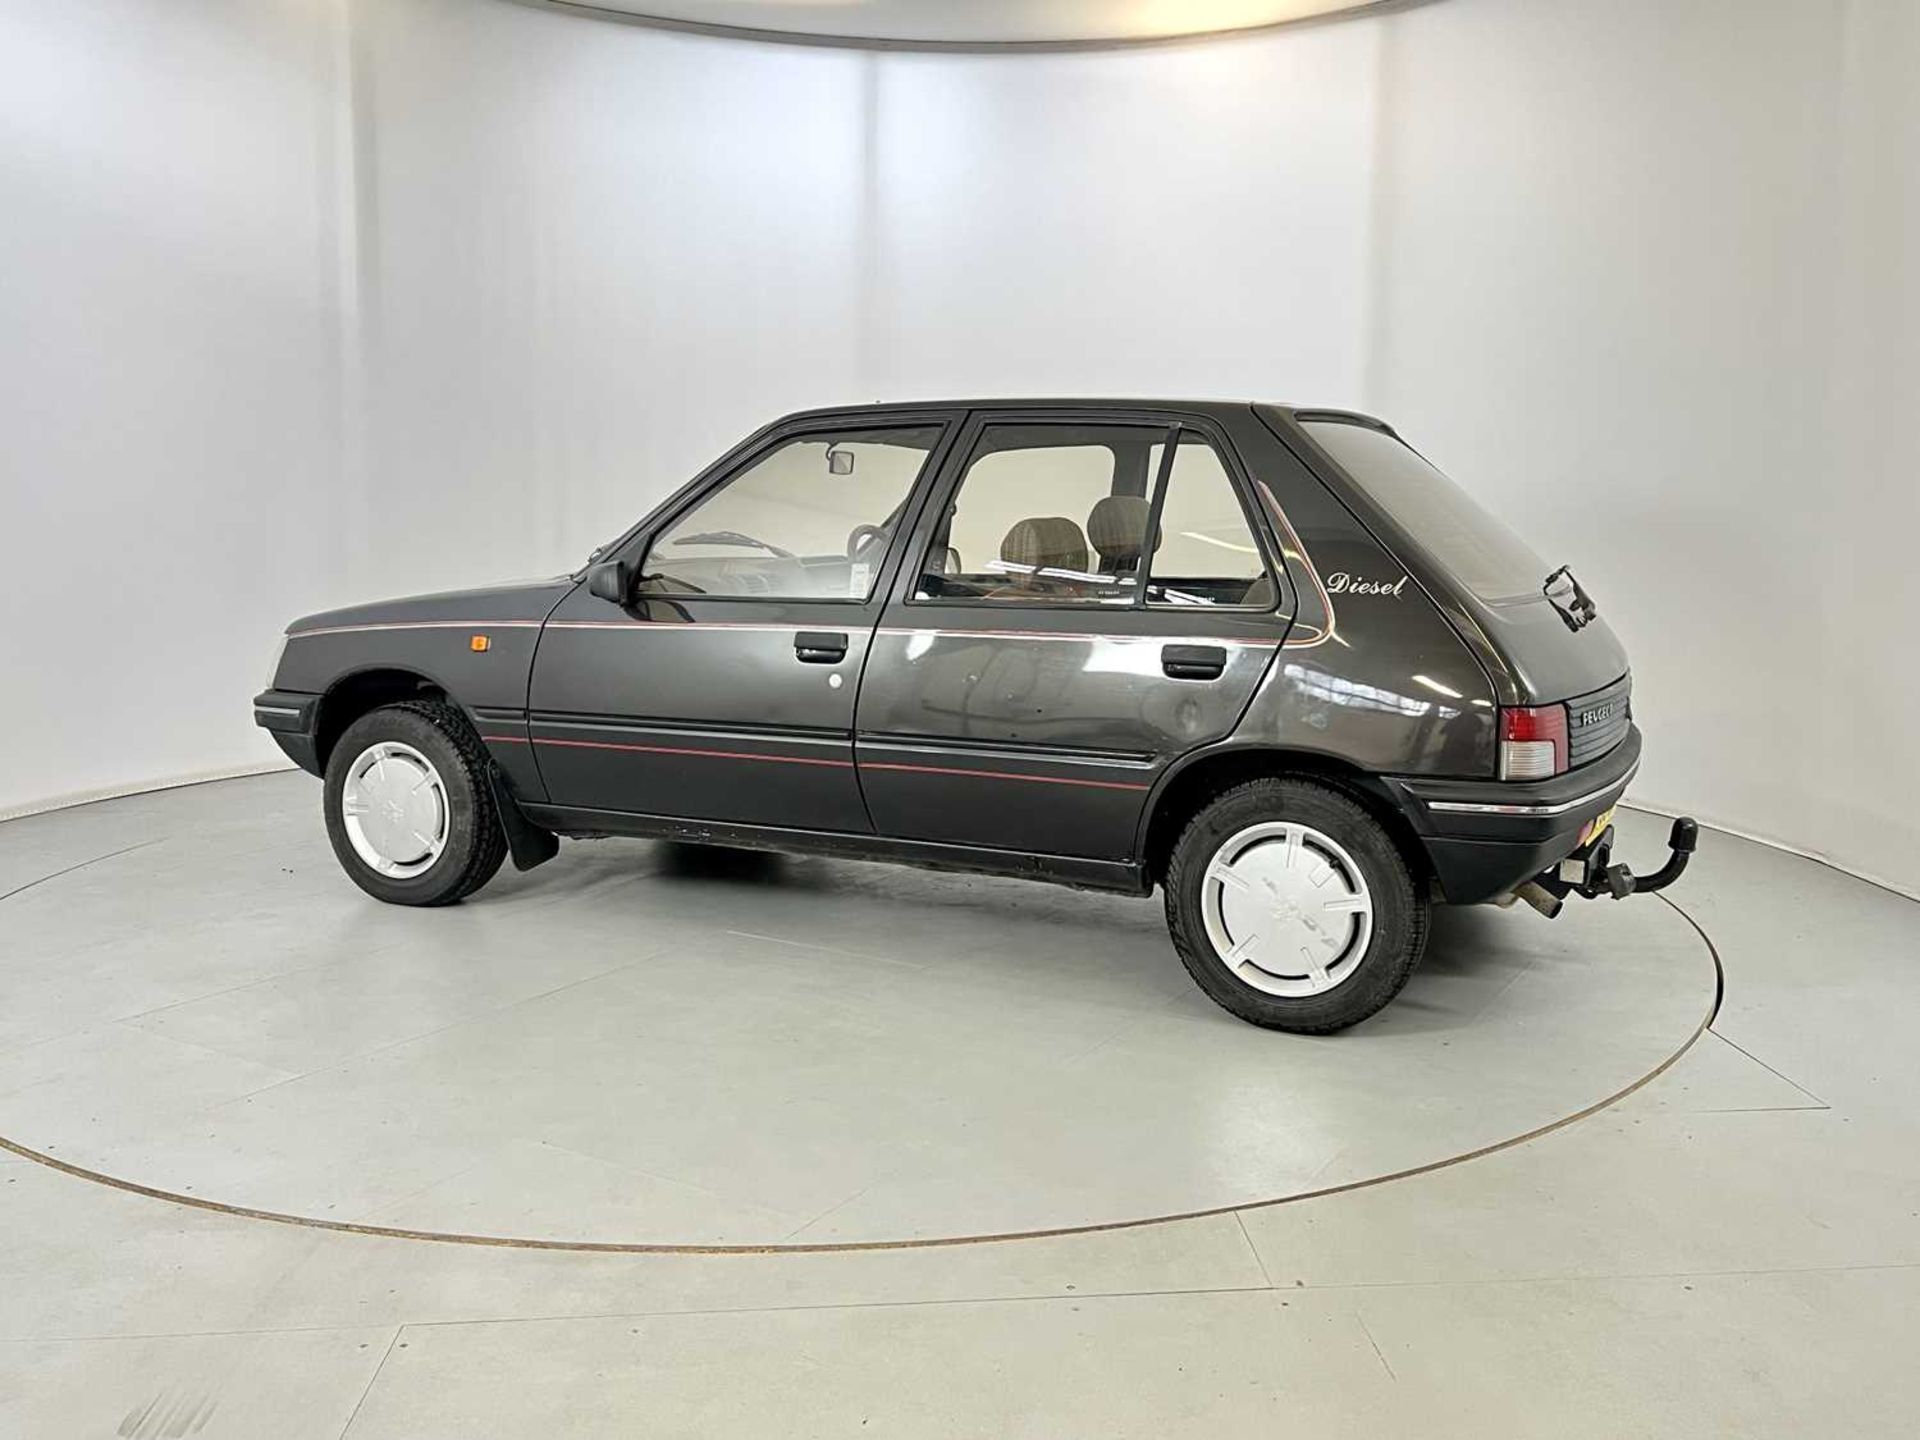 1990 Peugeot 205 GRD - Image 6 of 33